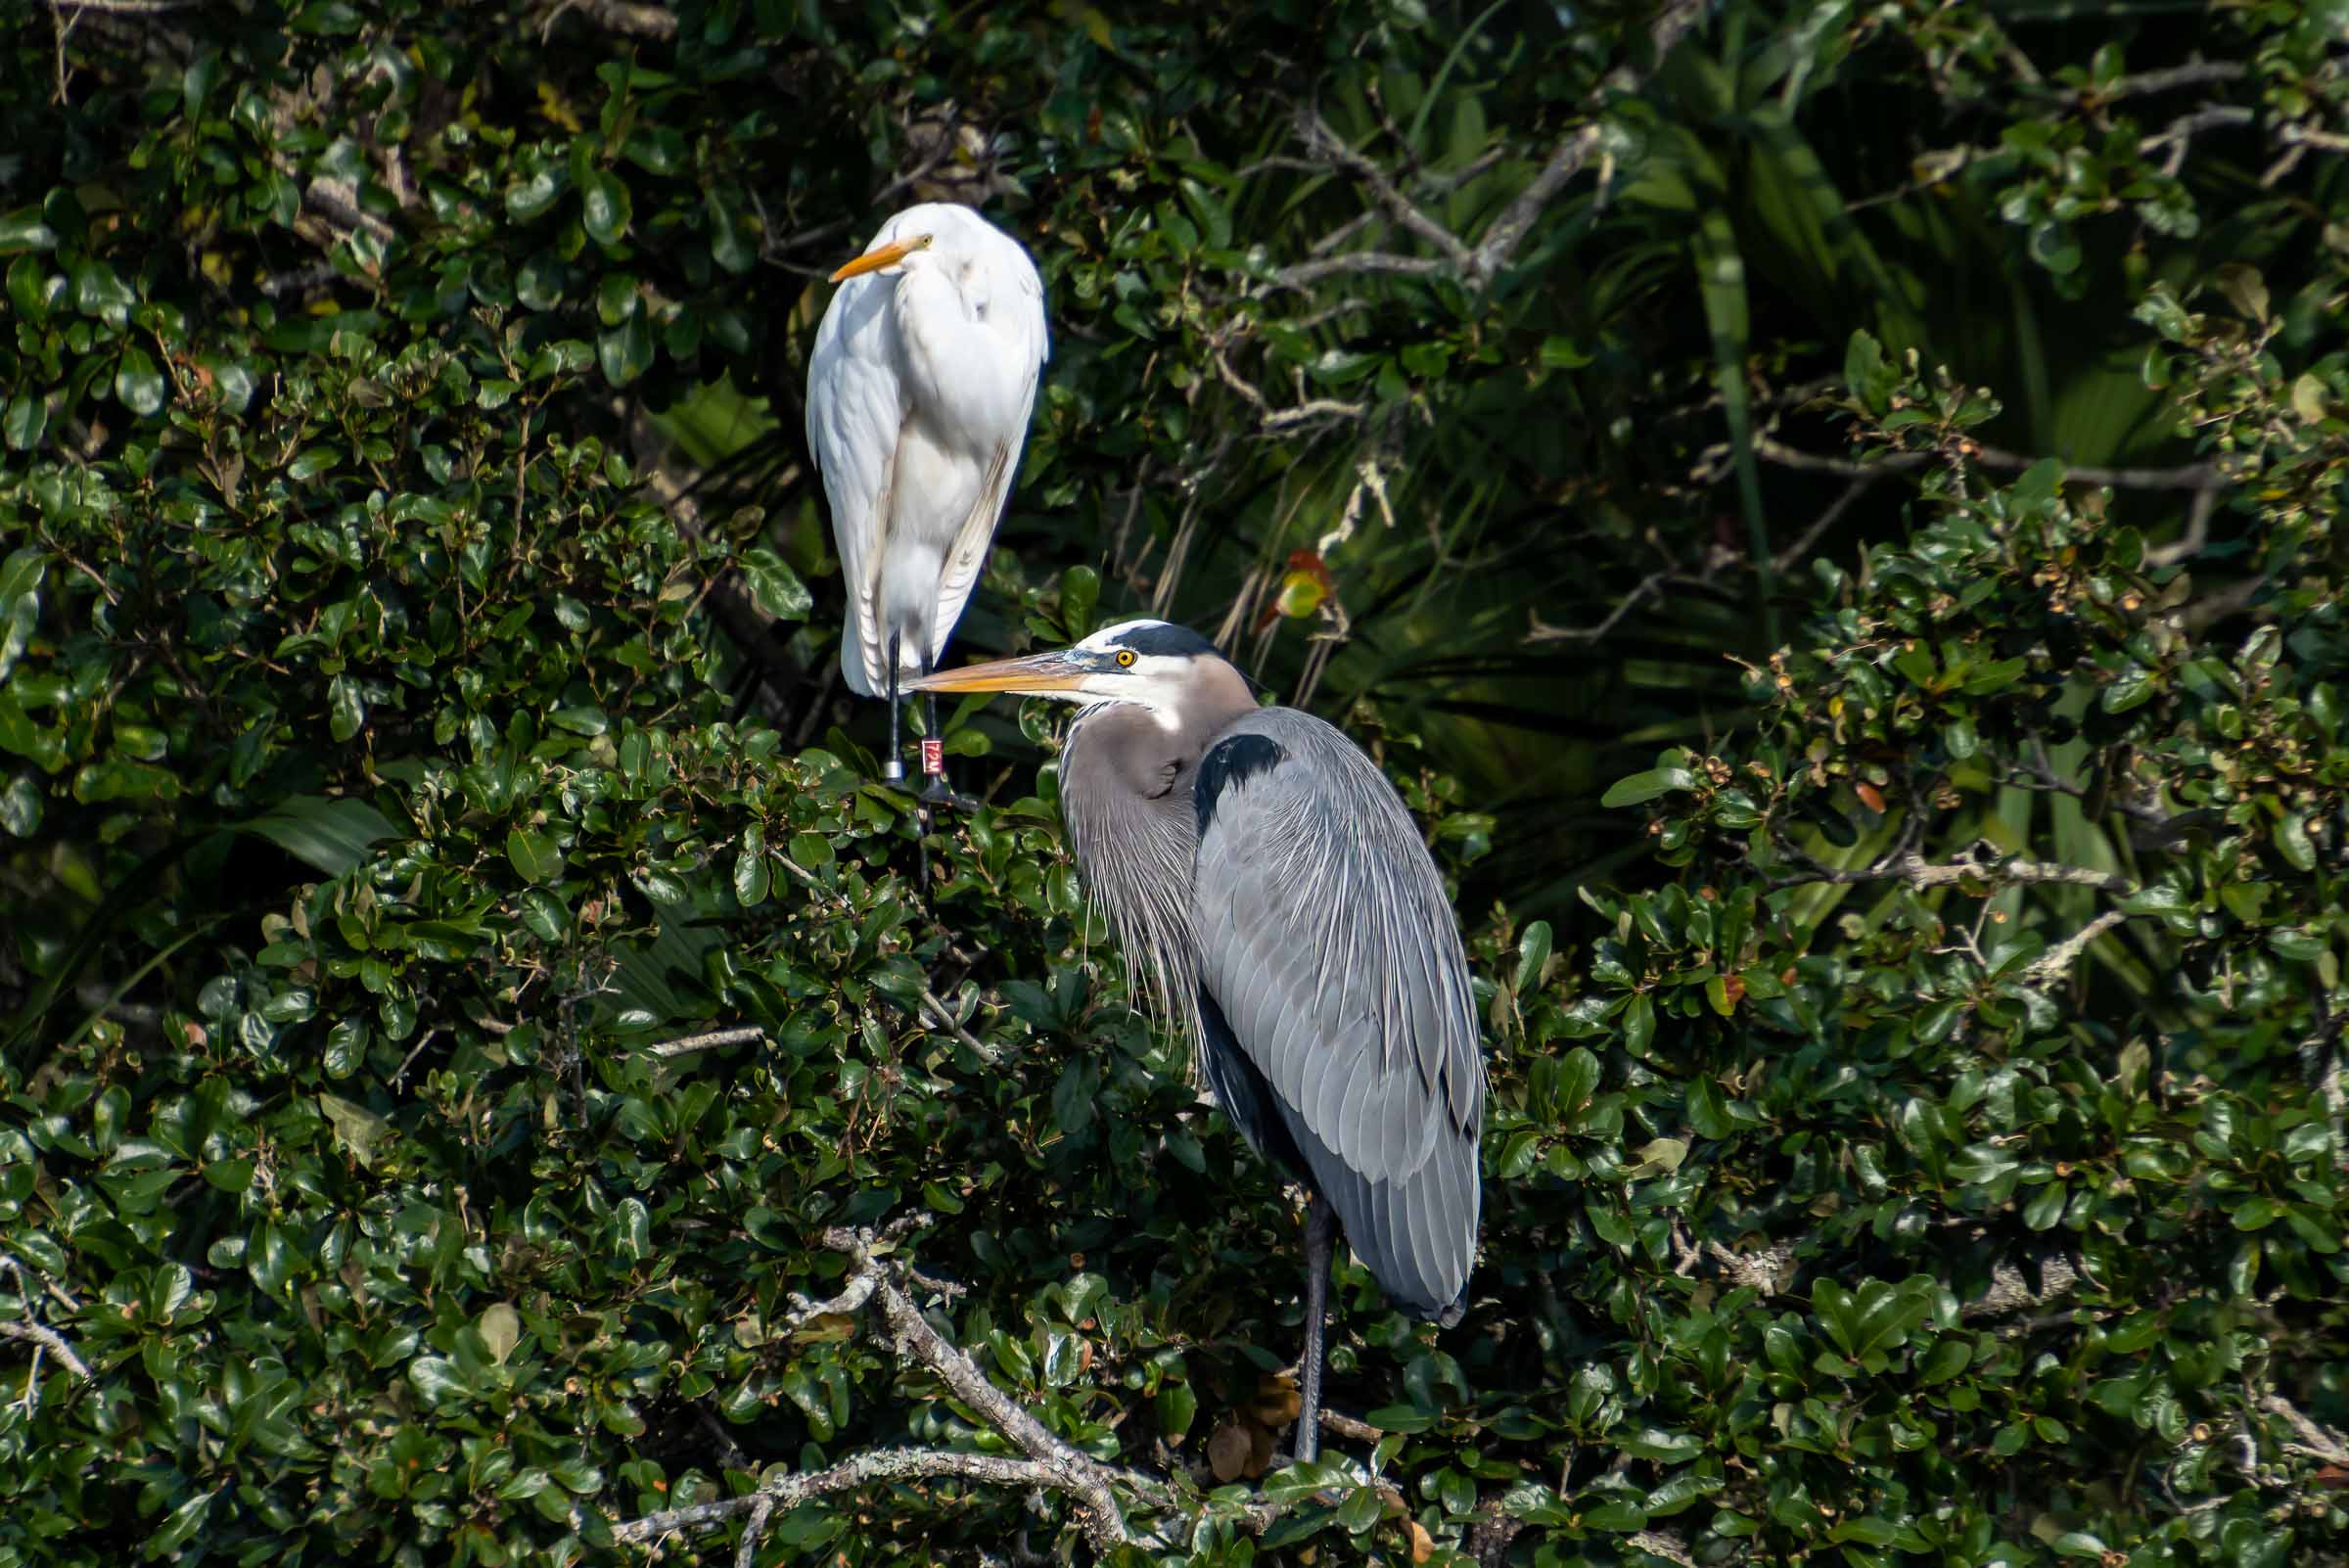 Great blue heron perched in tree on Florida birding and kayak tour. Viking EcoTours typically sees these shorebirds along the shoreline near maritime hammocks and mangrove islands during kayaking tours.